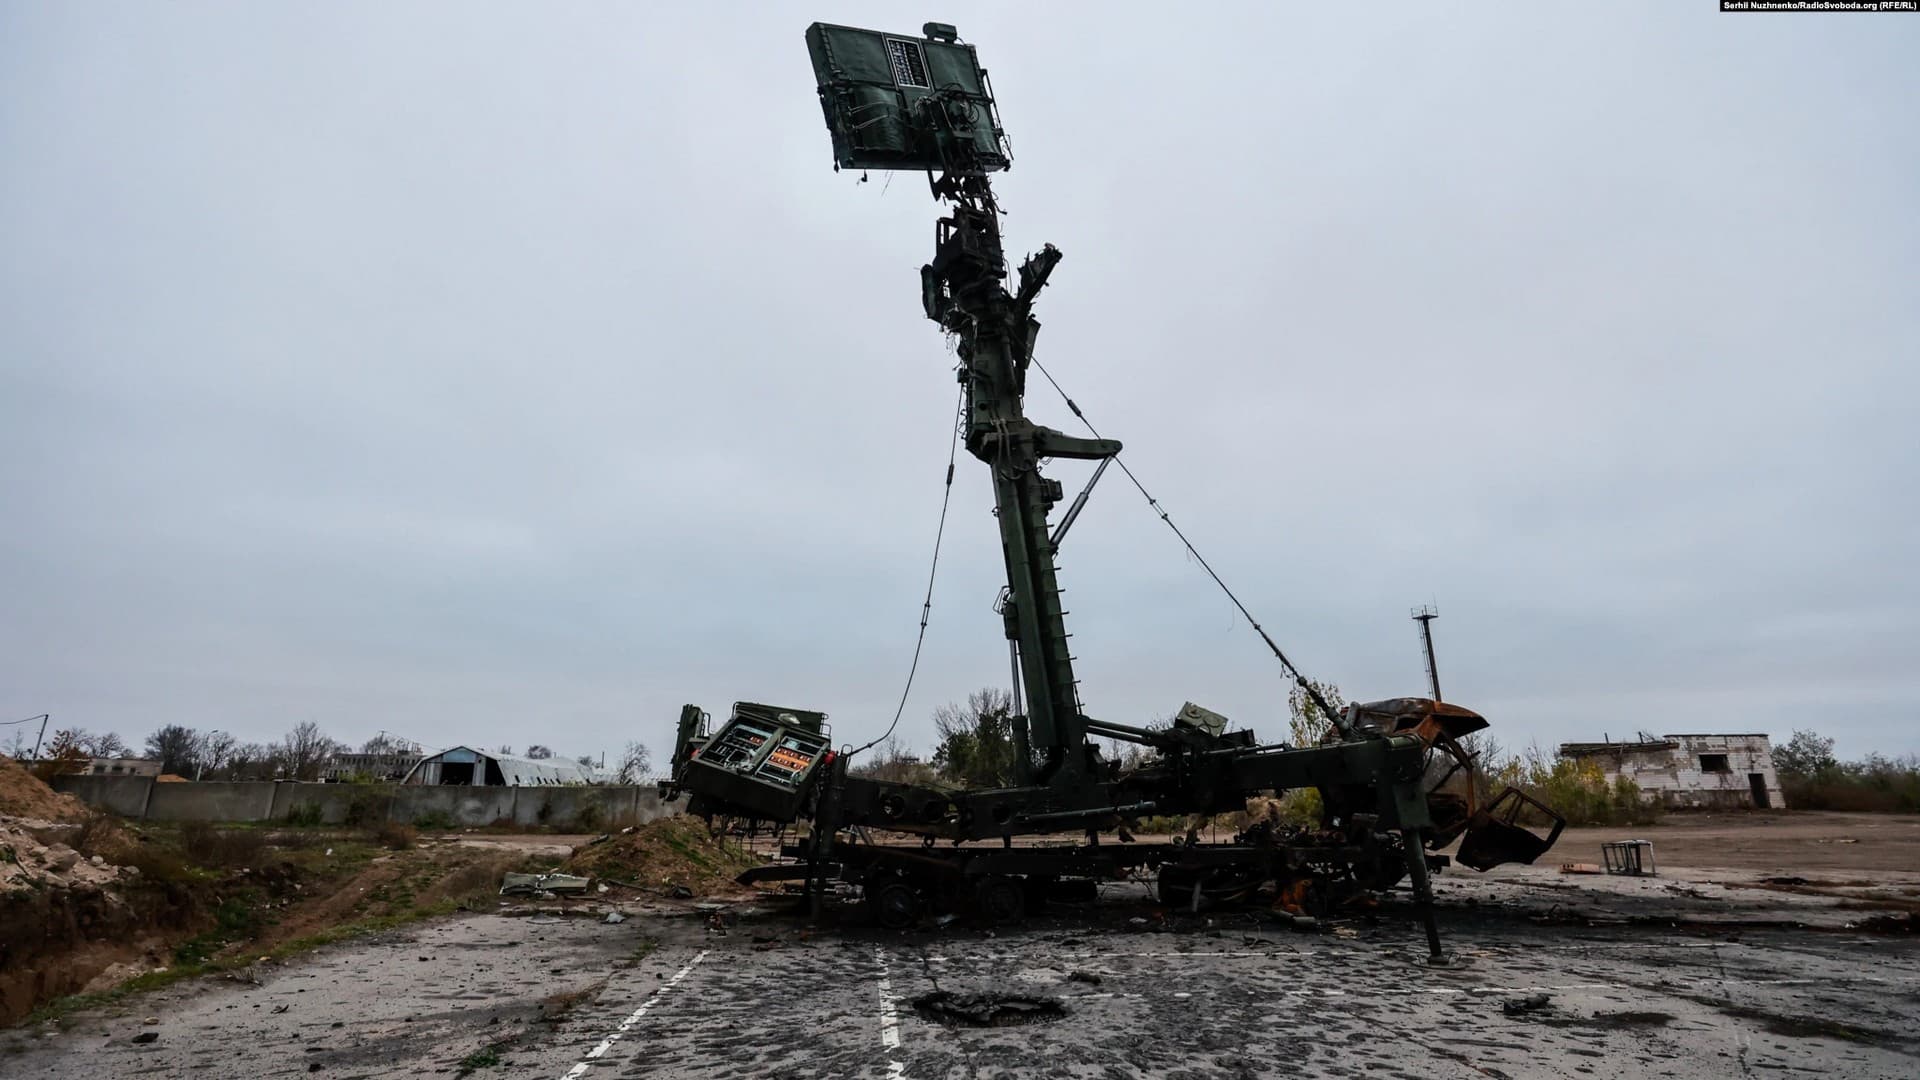 A destroyed Podlet radar system next to the crater of a large explosion at the airport in Kherson